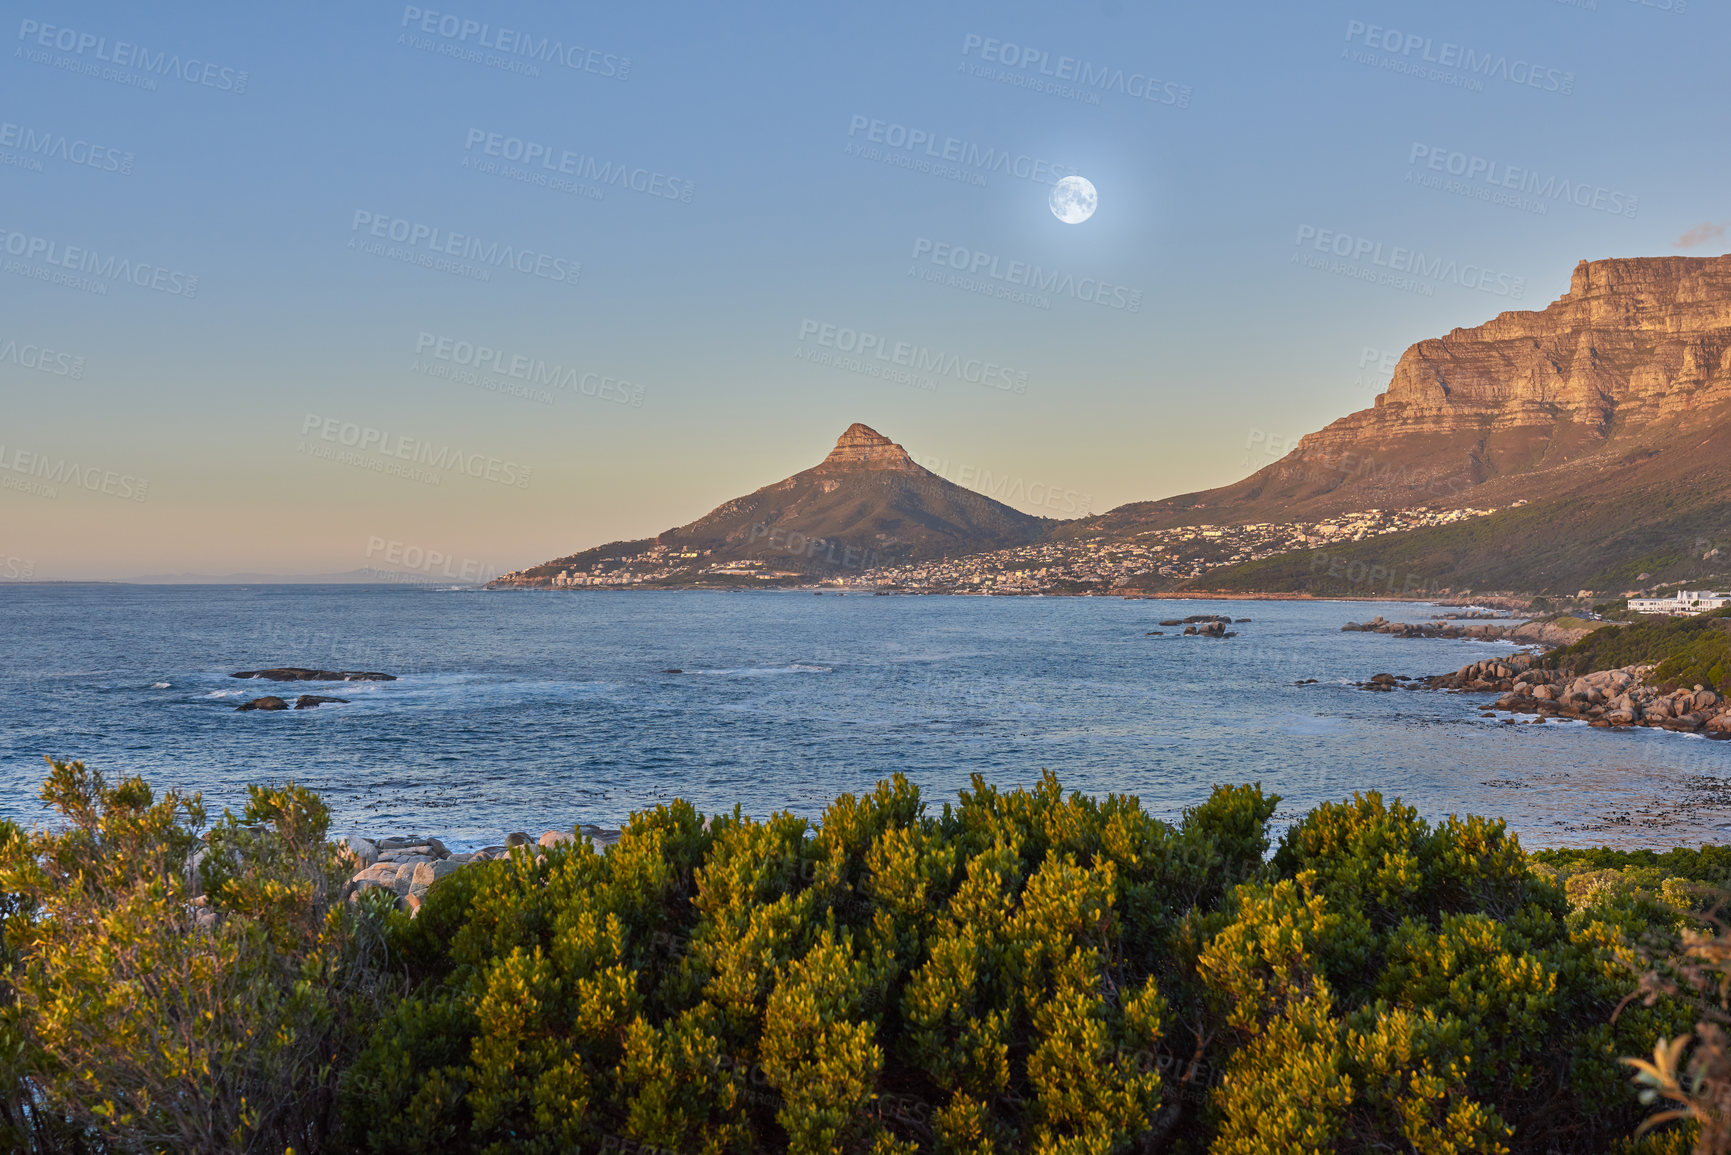 Buy stock photo Lush plants in nature with the ocean and mountain in background against blue sky with a full moon. Scenic popular natural landmark and tourist attraction for adventure while on vacation in Cape Town